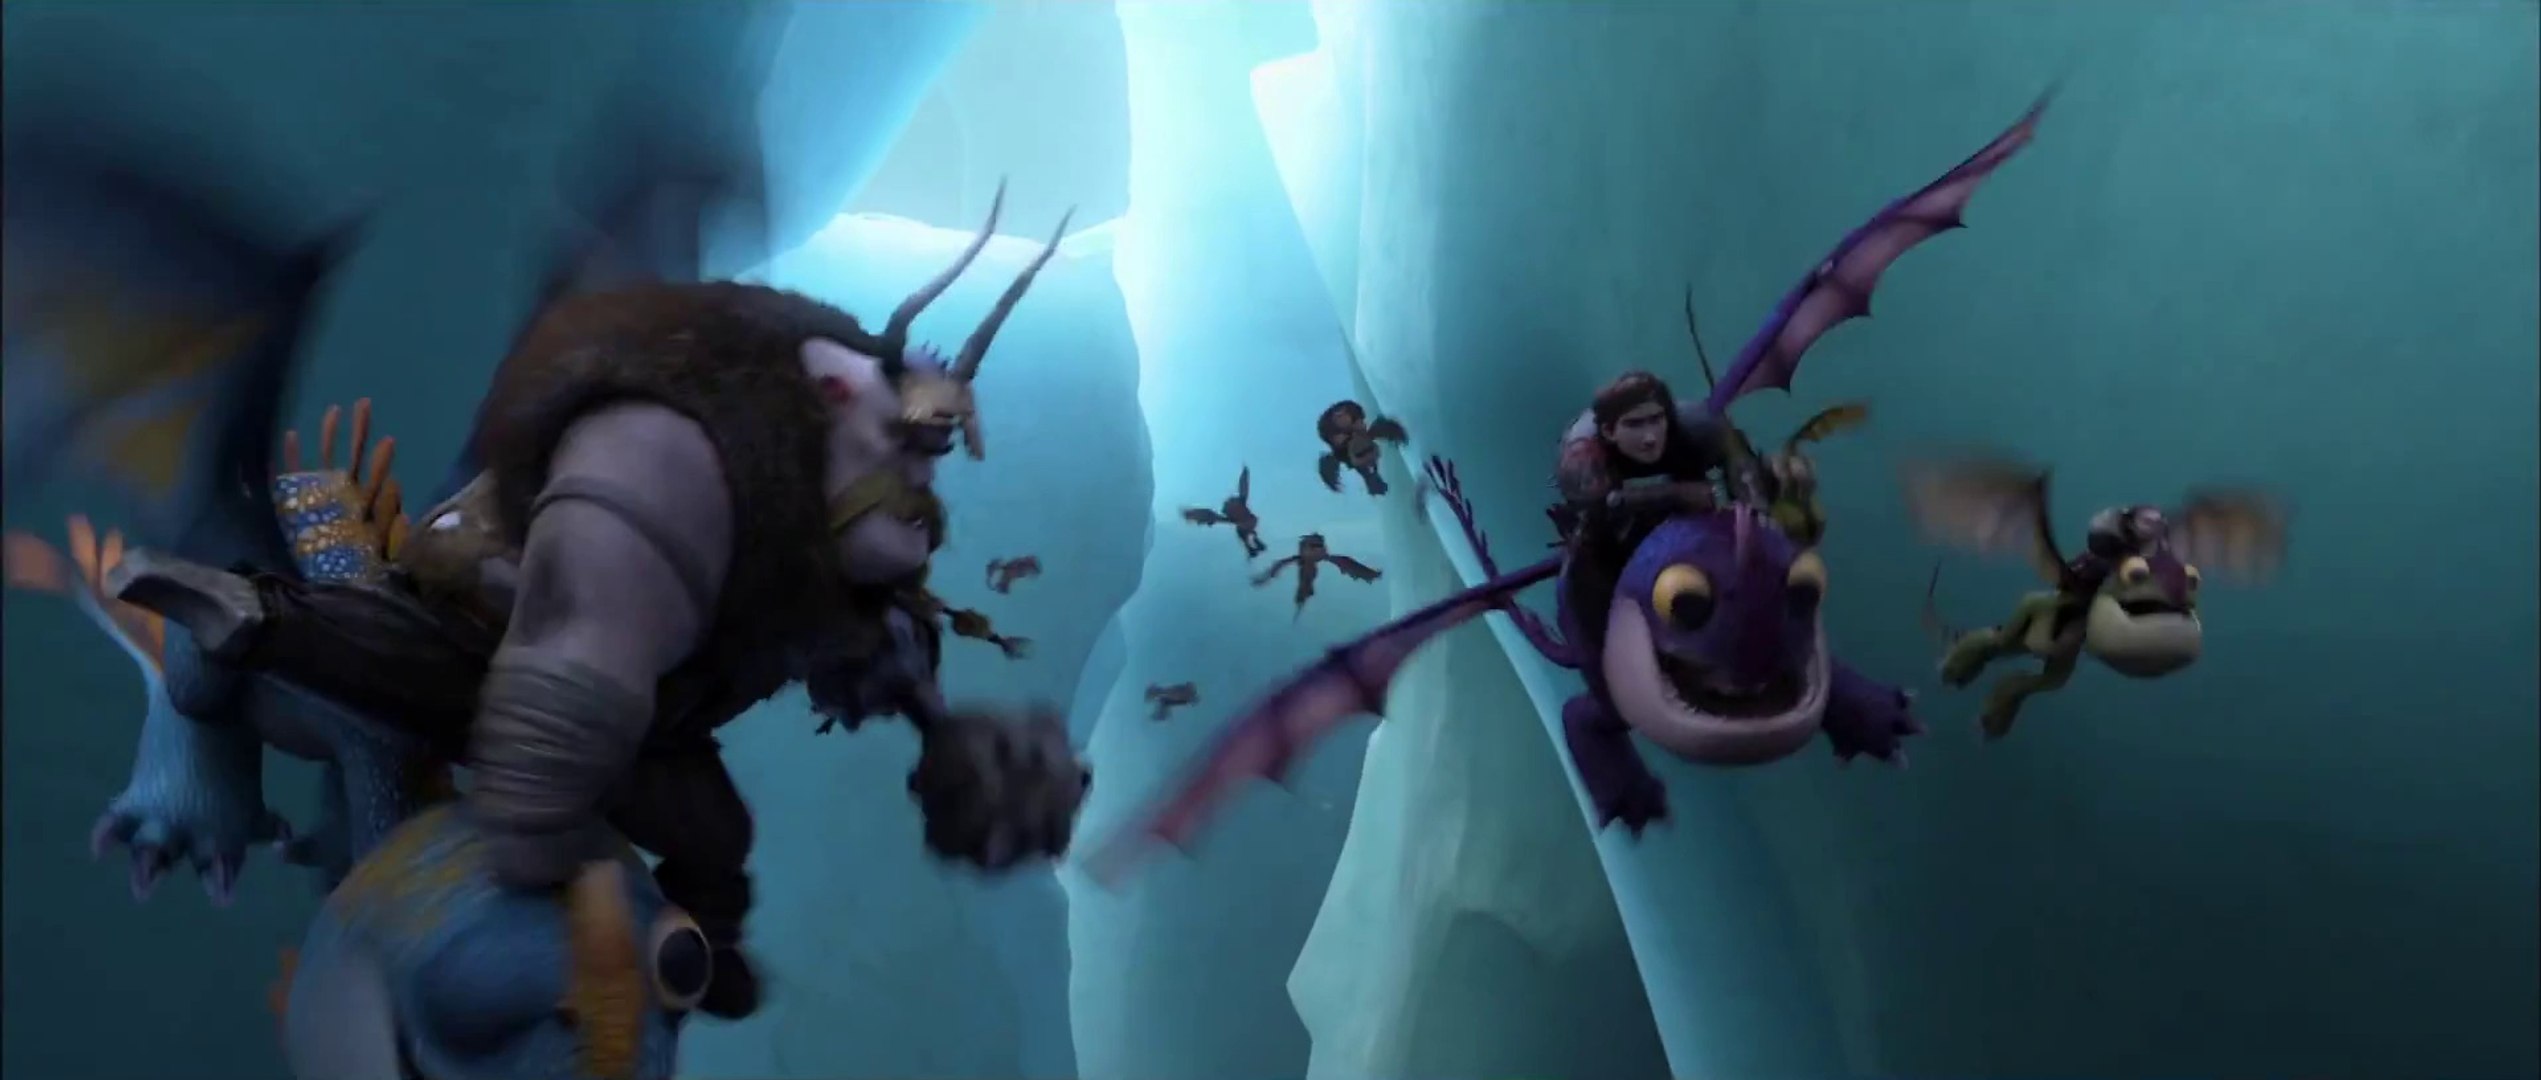 HOW TO TRAIN YOUR DRAGON 2 - Extrait "Baby Dragons" [VO|HD1080p] - Vidéo  Dailymotion